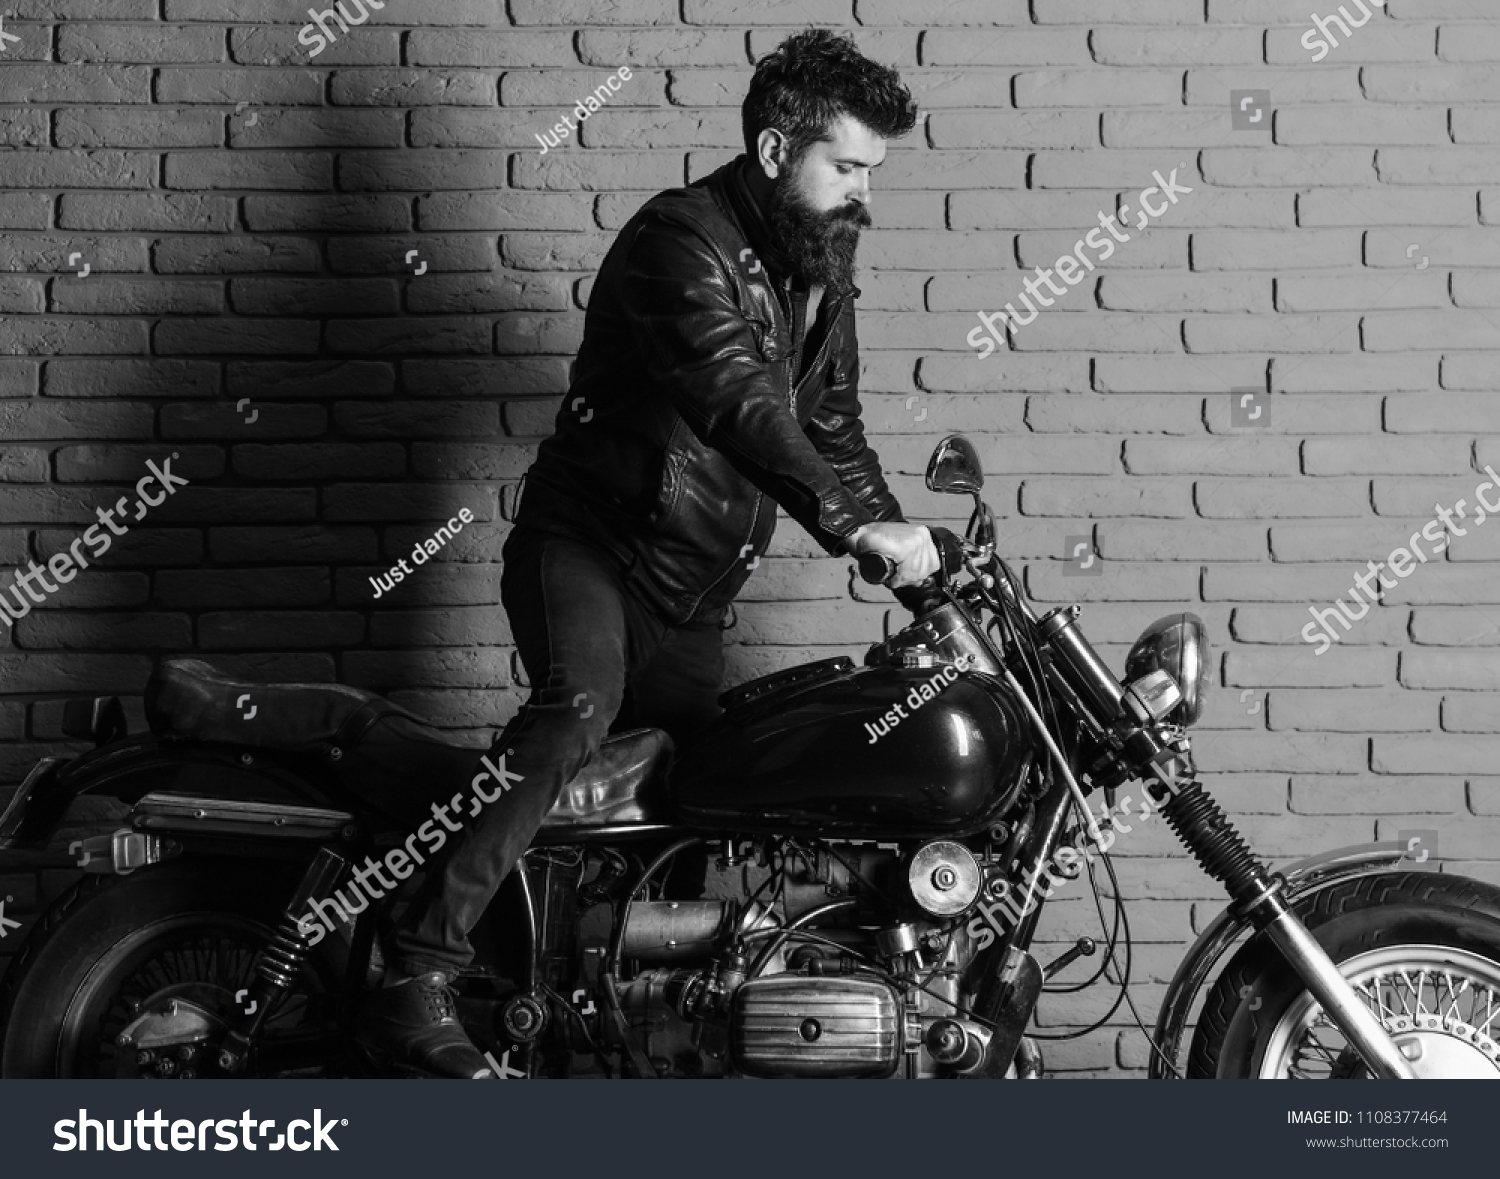 man on a motorcycle. Hipster, brutal biker on serious face in leather jacket gets on motorcycle. Man with beard, biker in leather jacket near motor bike in garage, brick wall background #1108377464